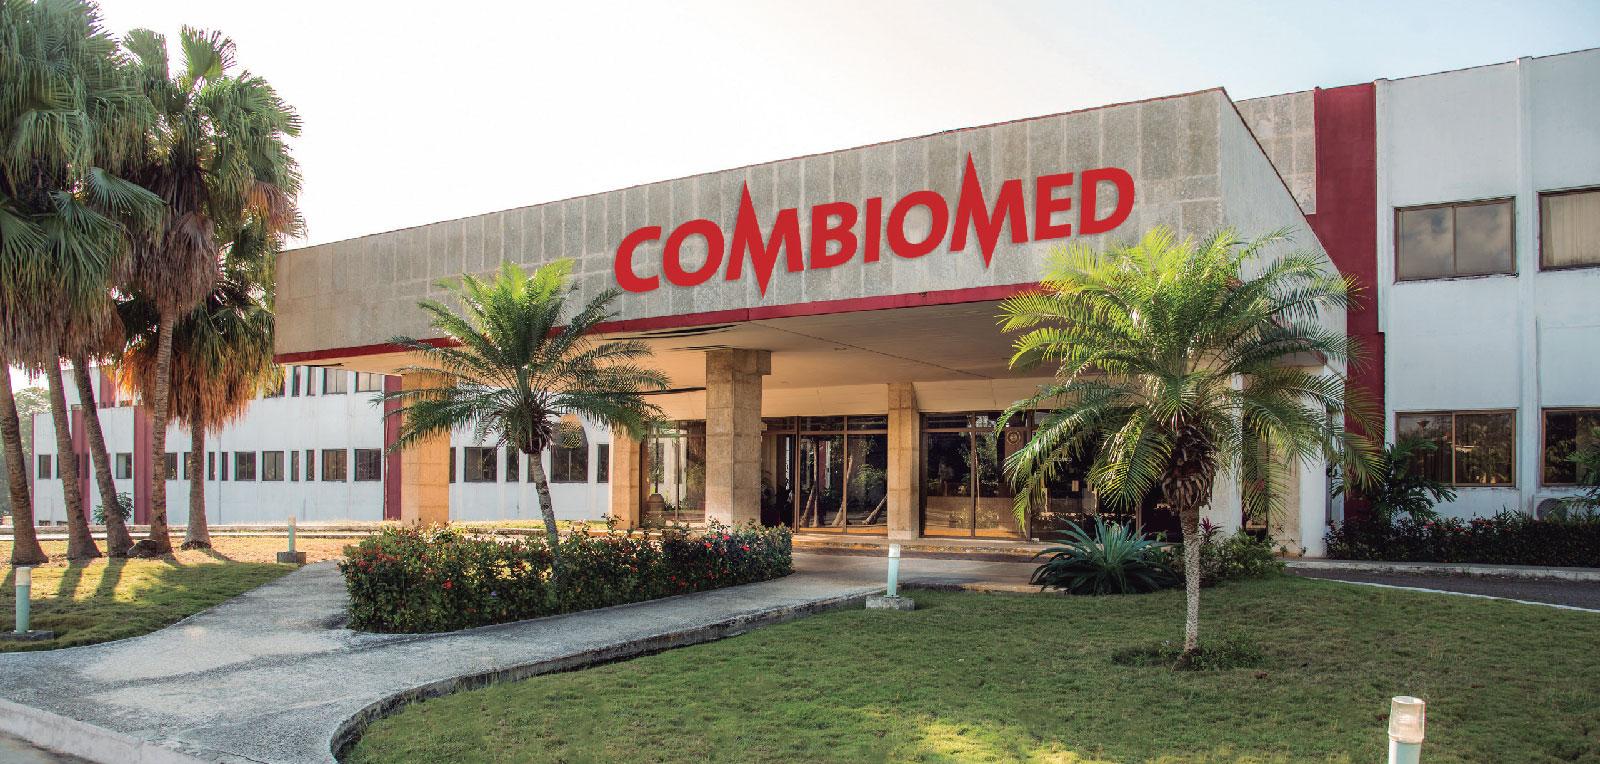 COMBIOMED. Technology at the service of health care